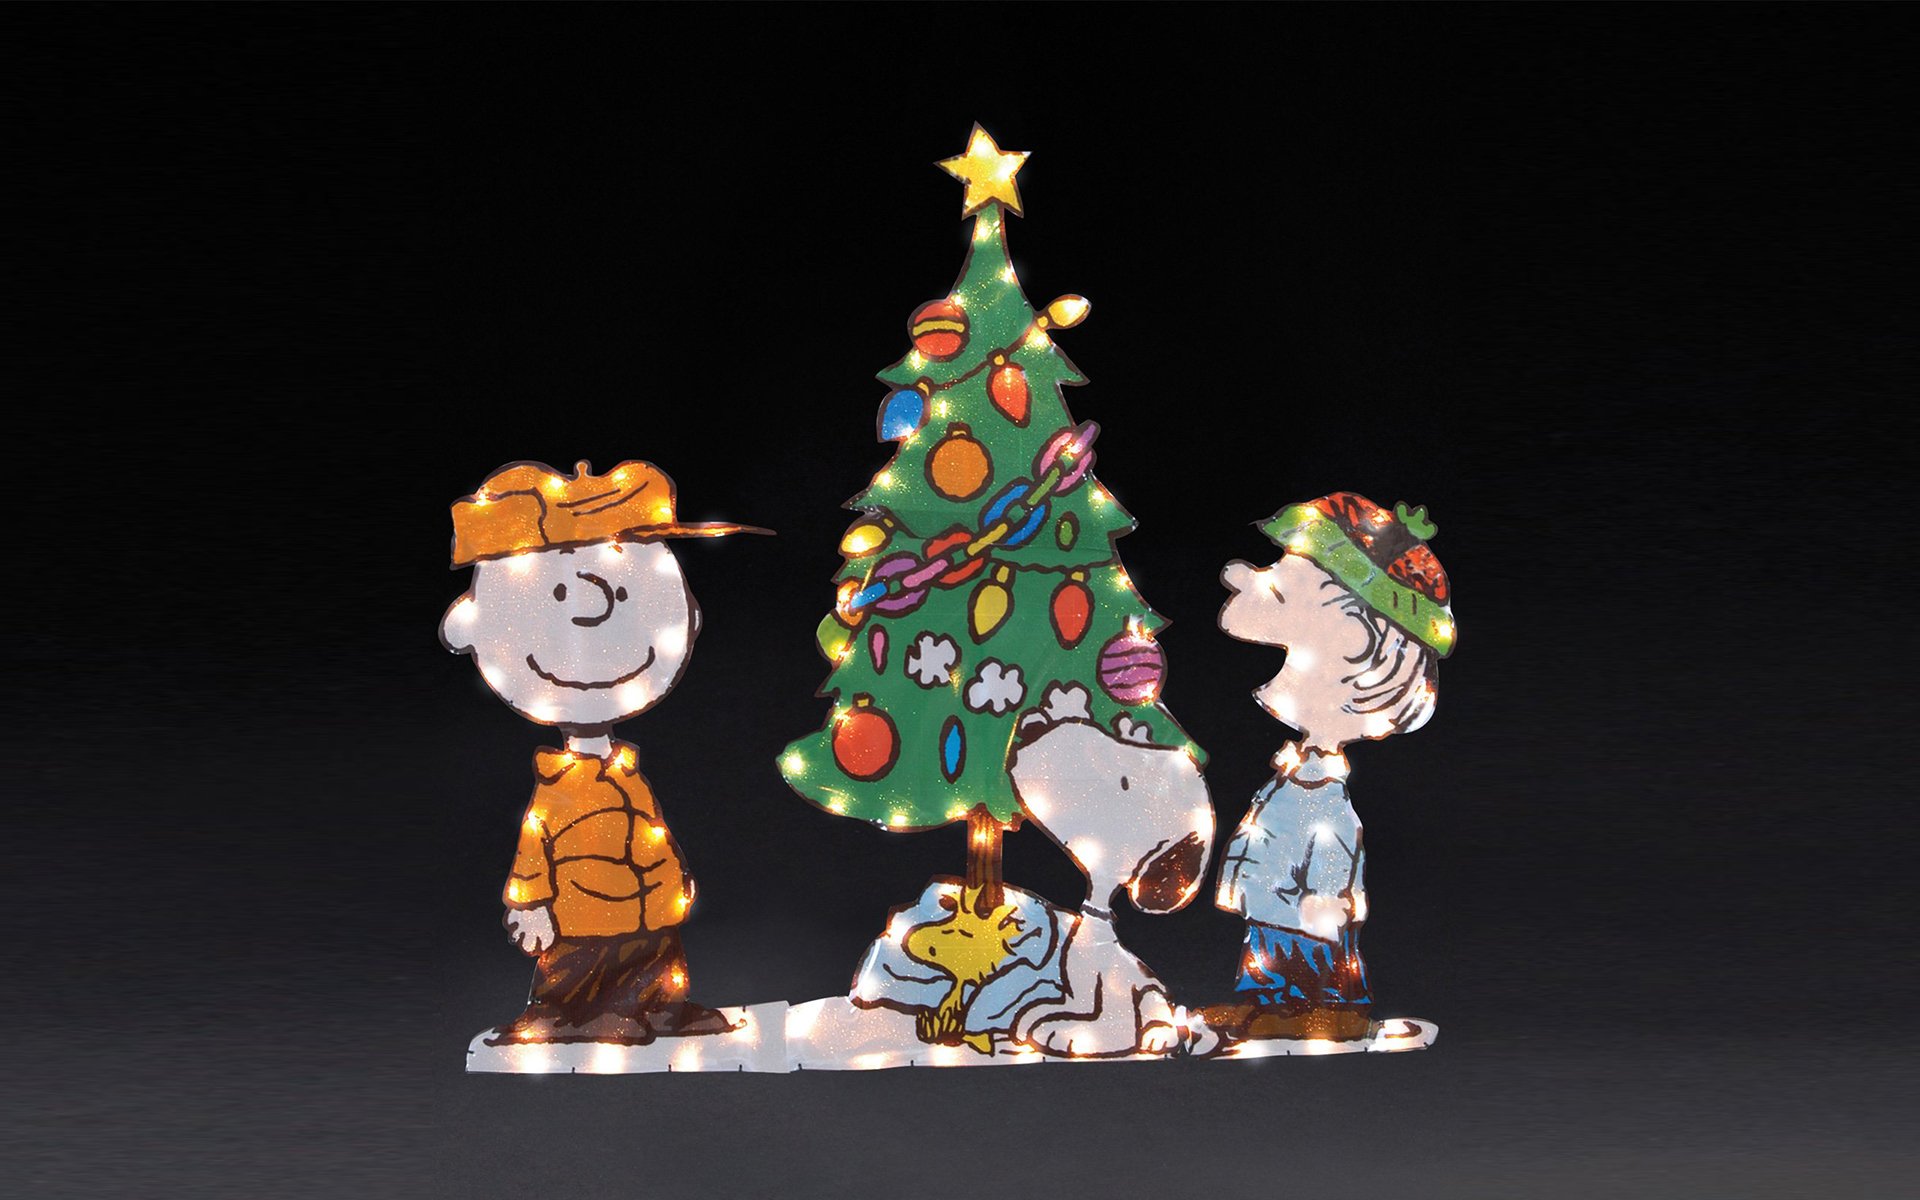 Charlie Brown Christmas Background